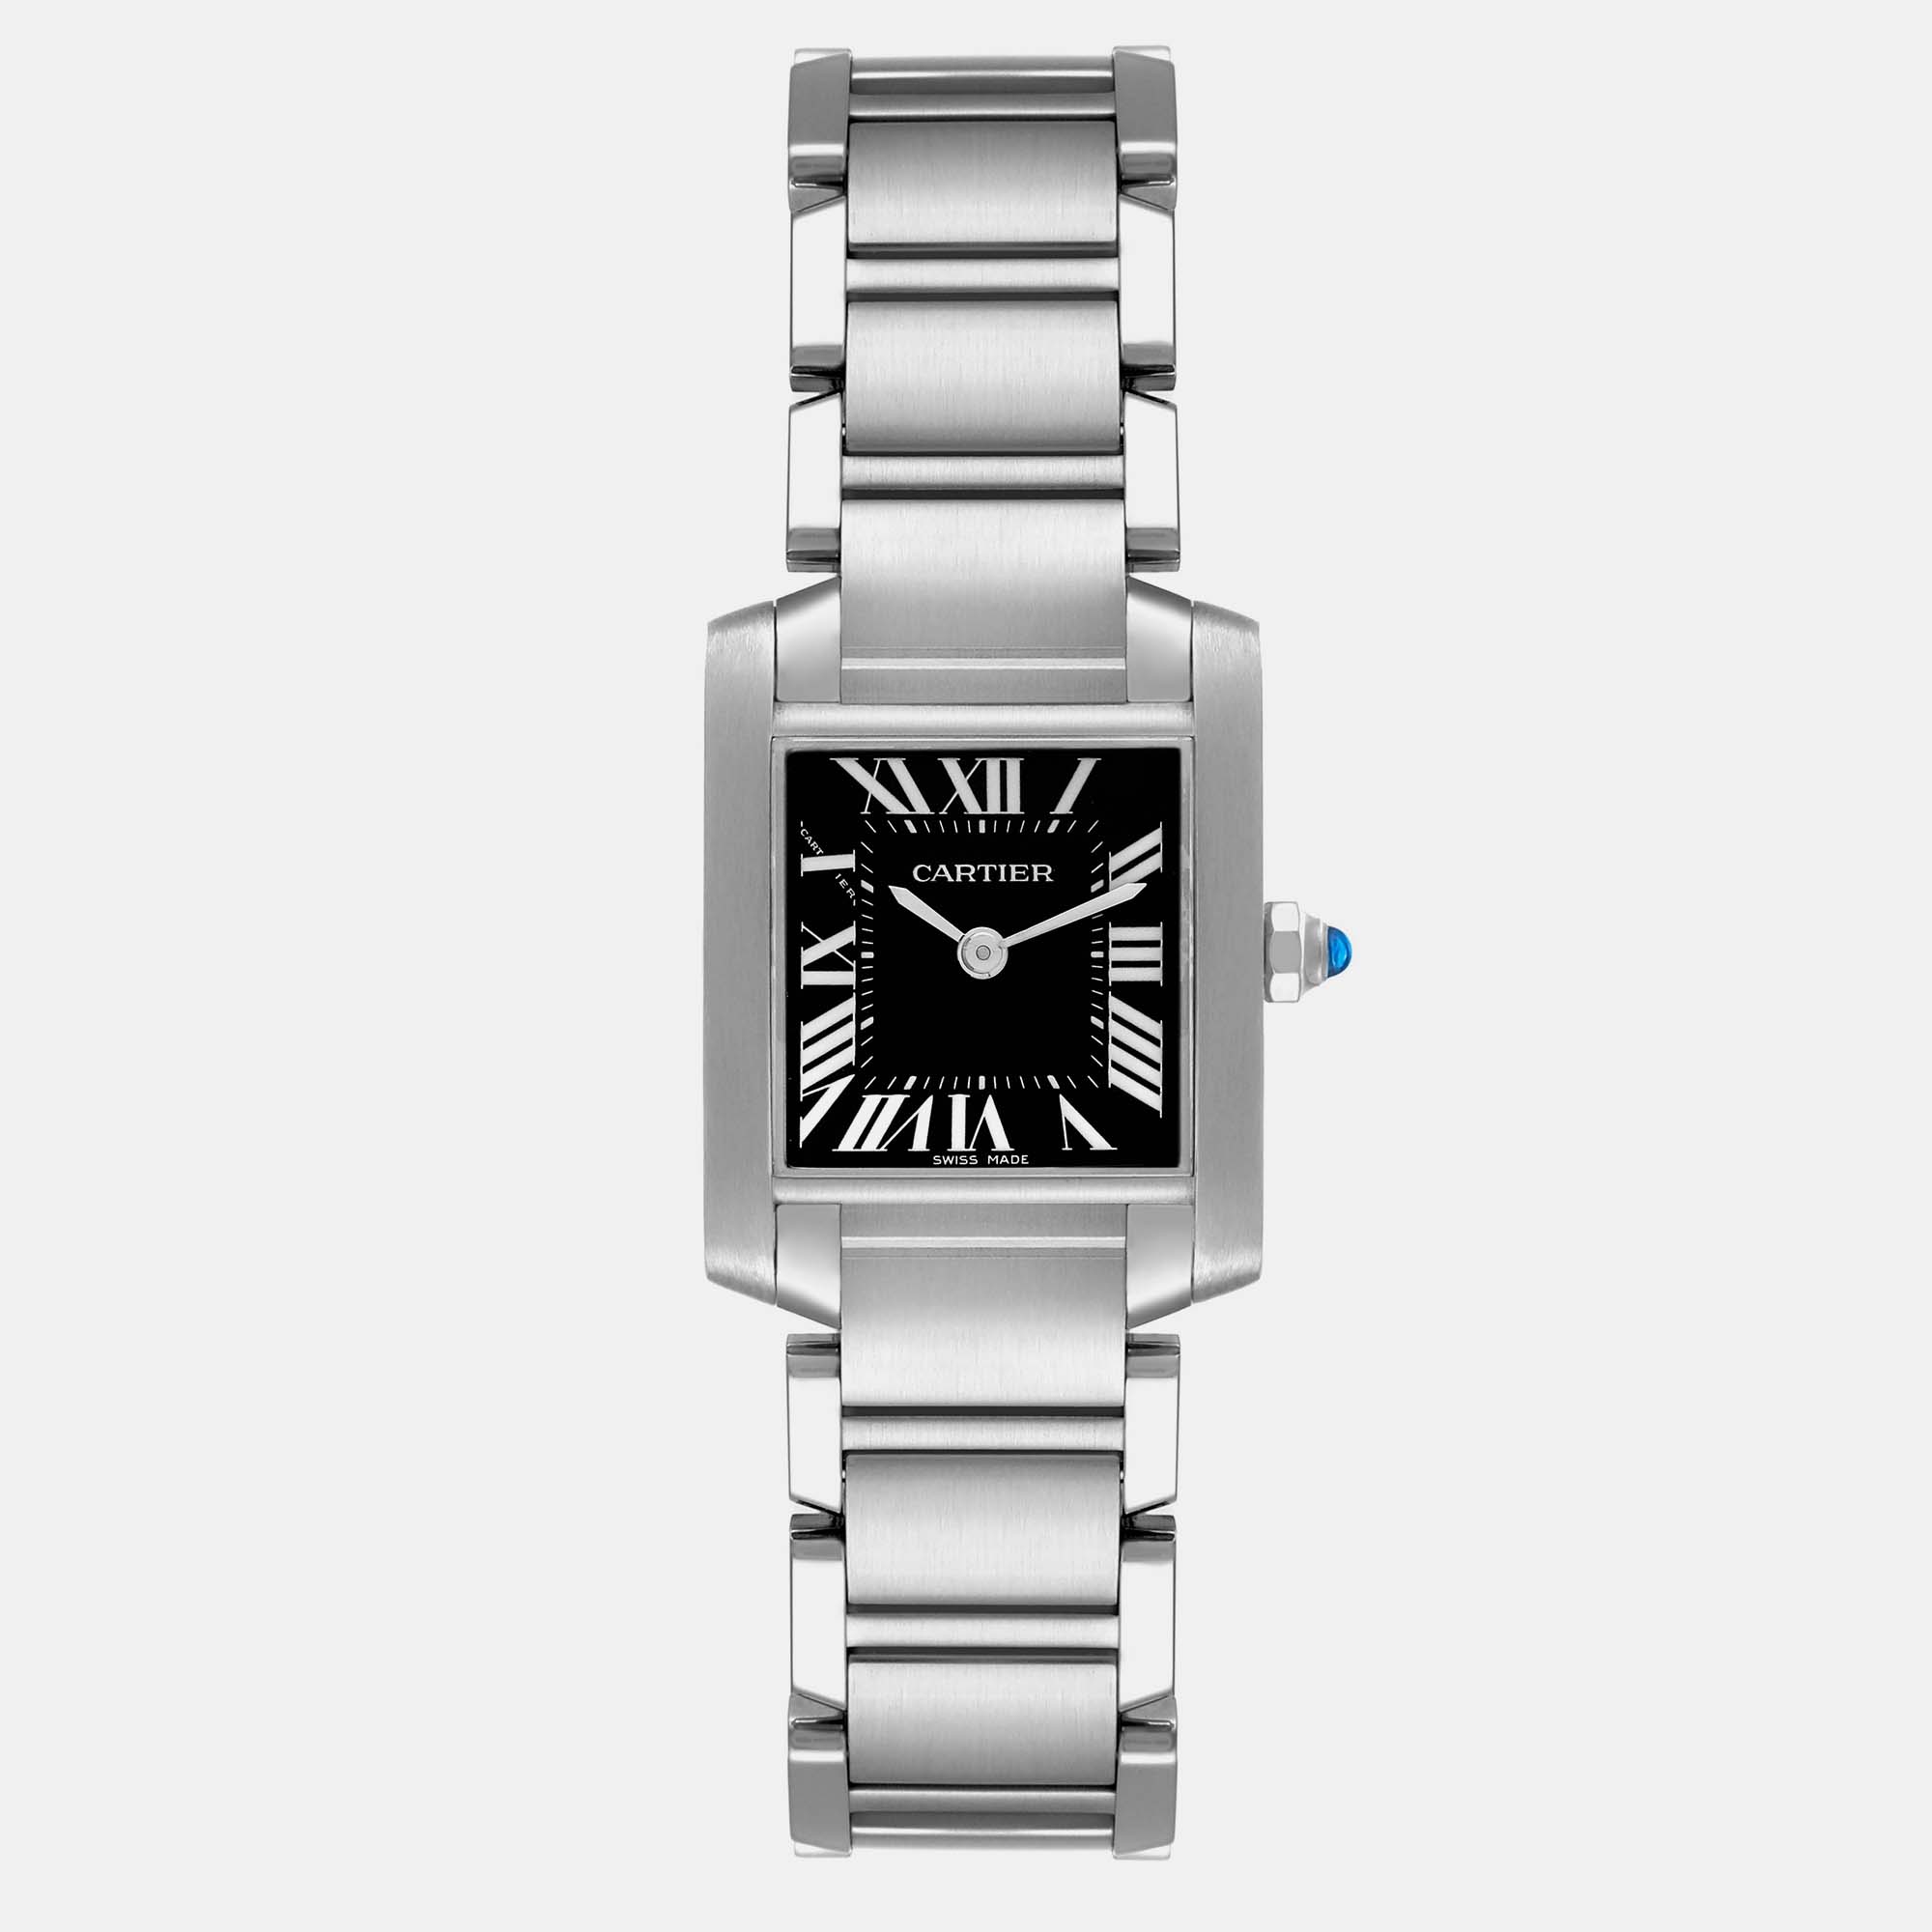 Pre-owned Cartier Tank Francaise Black Dial Steel Ladies Watch W51026q3 20.0 Mm X 25.0 Mm